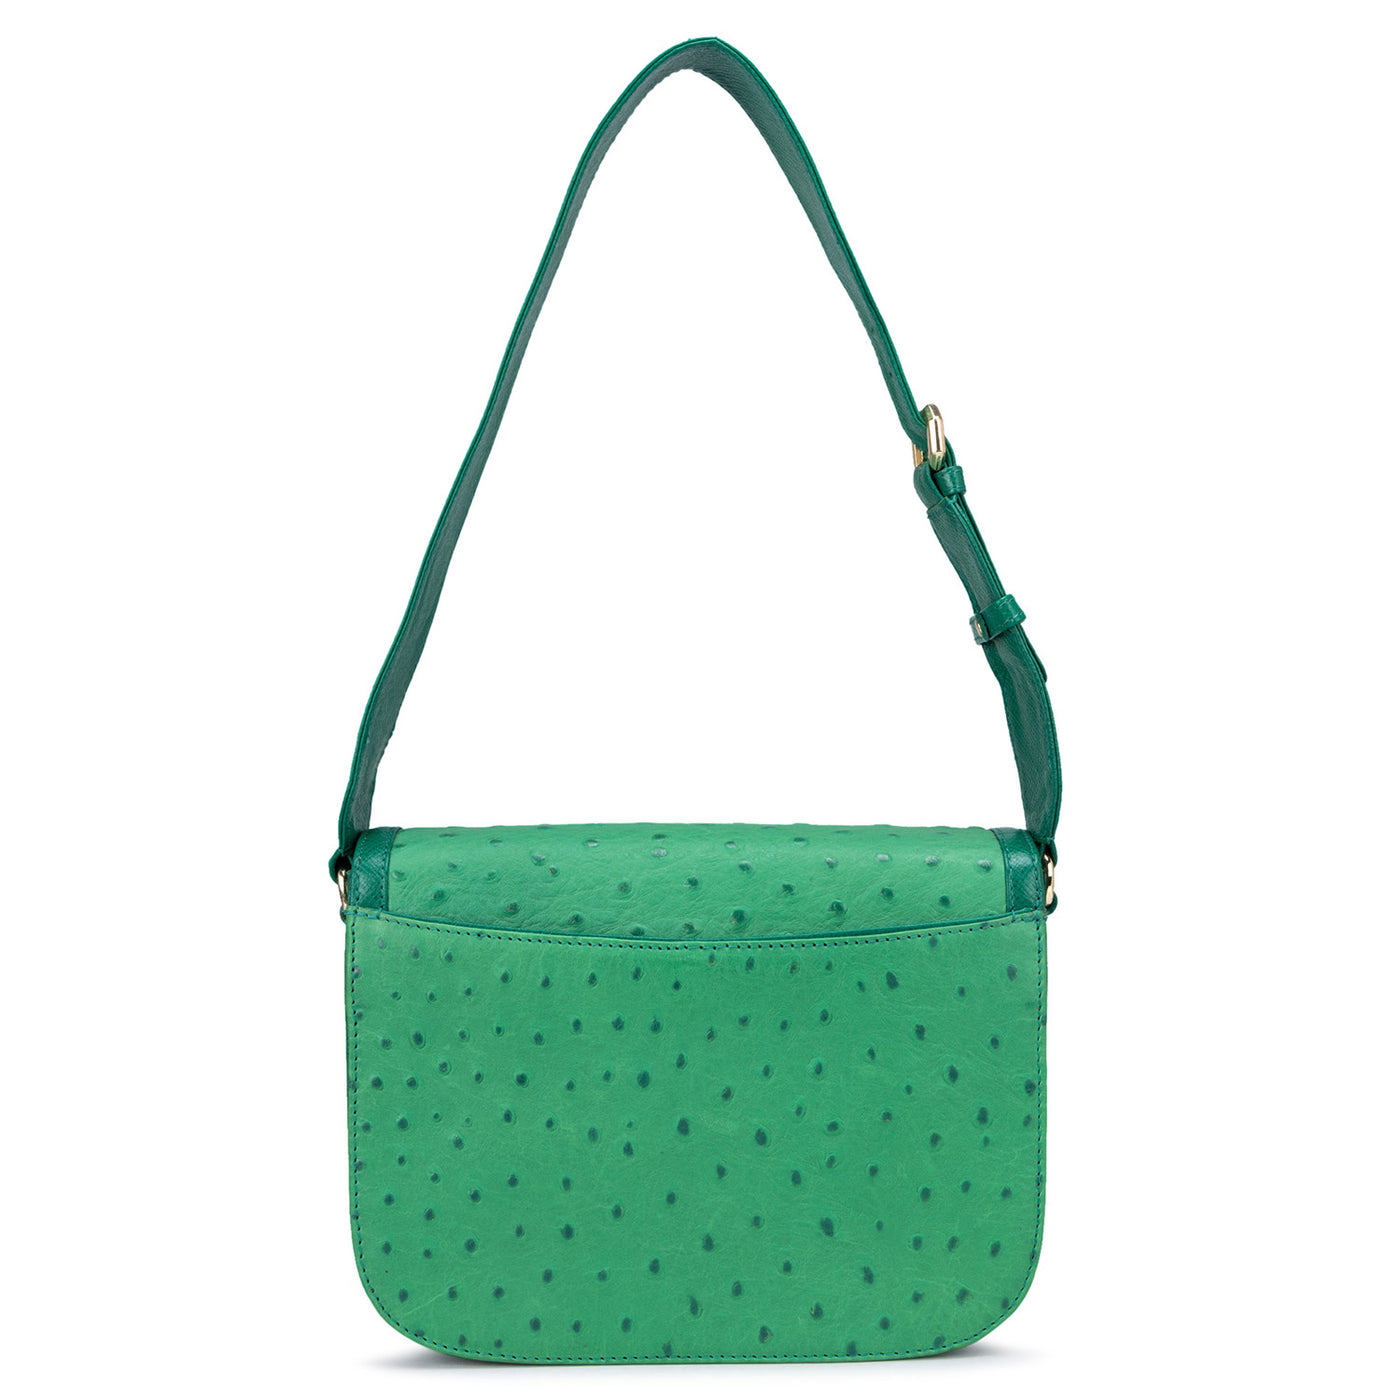 Small Ostrich Leather Shoulder Bag - Green